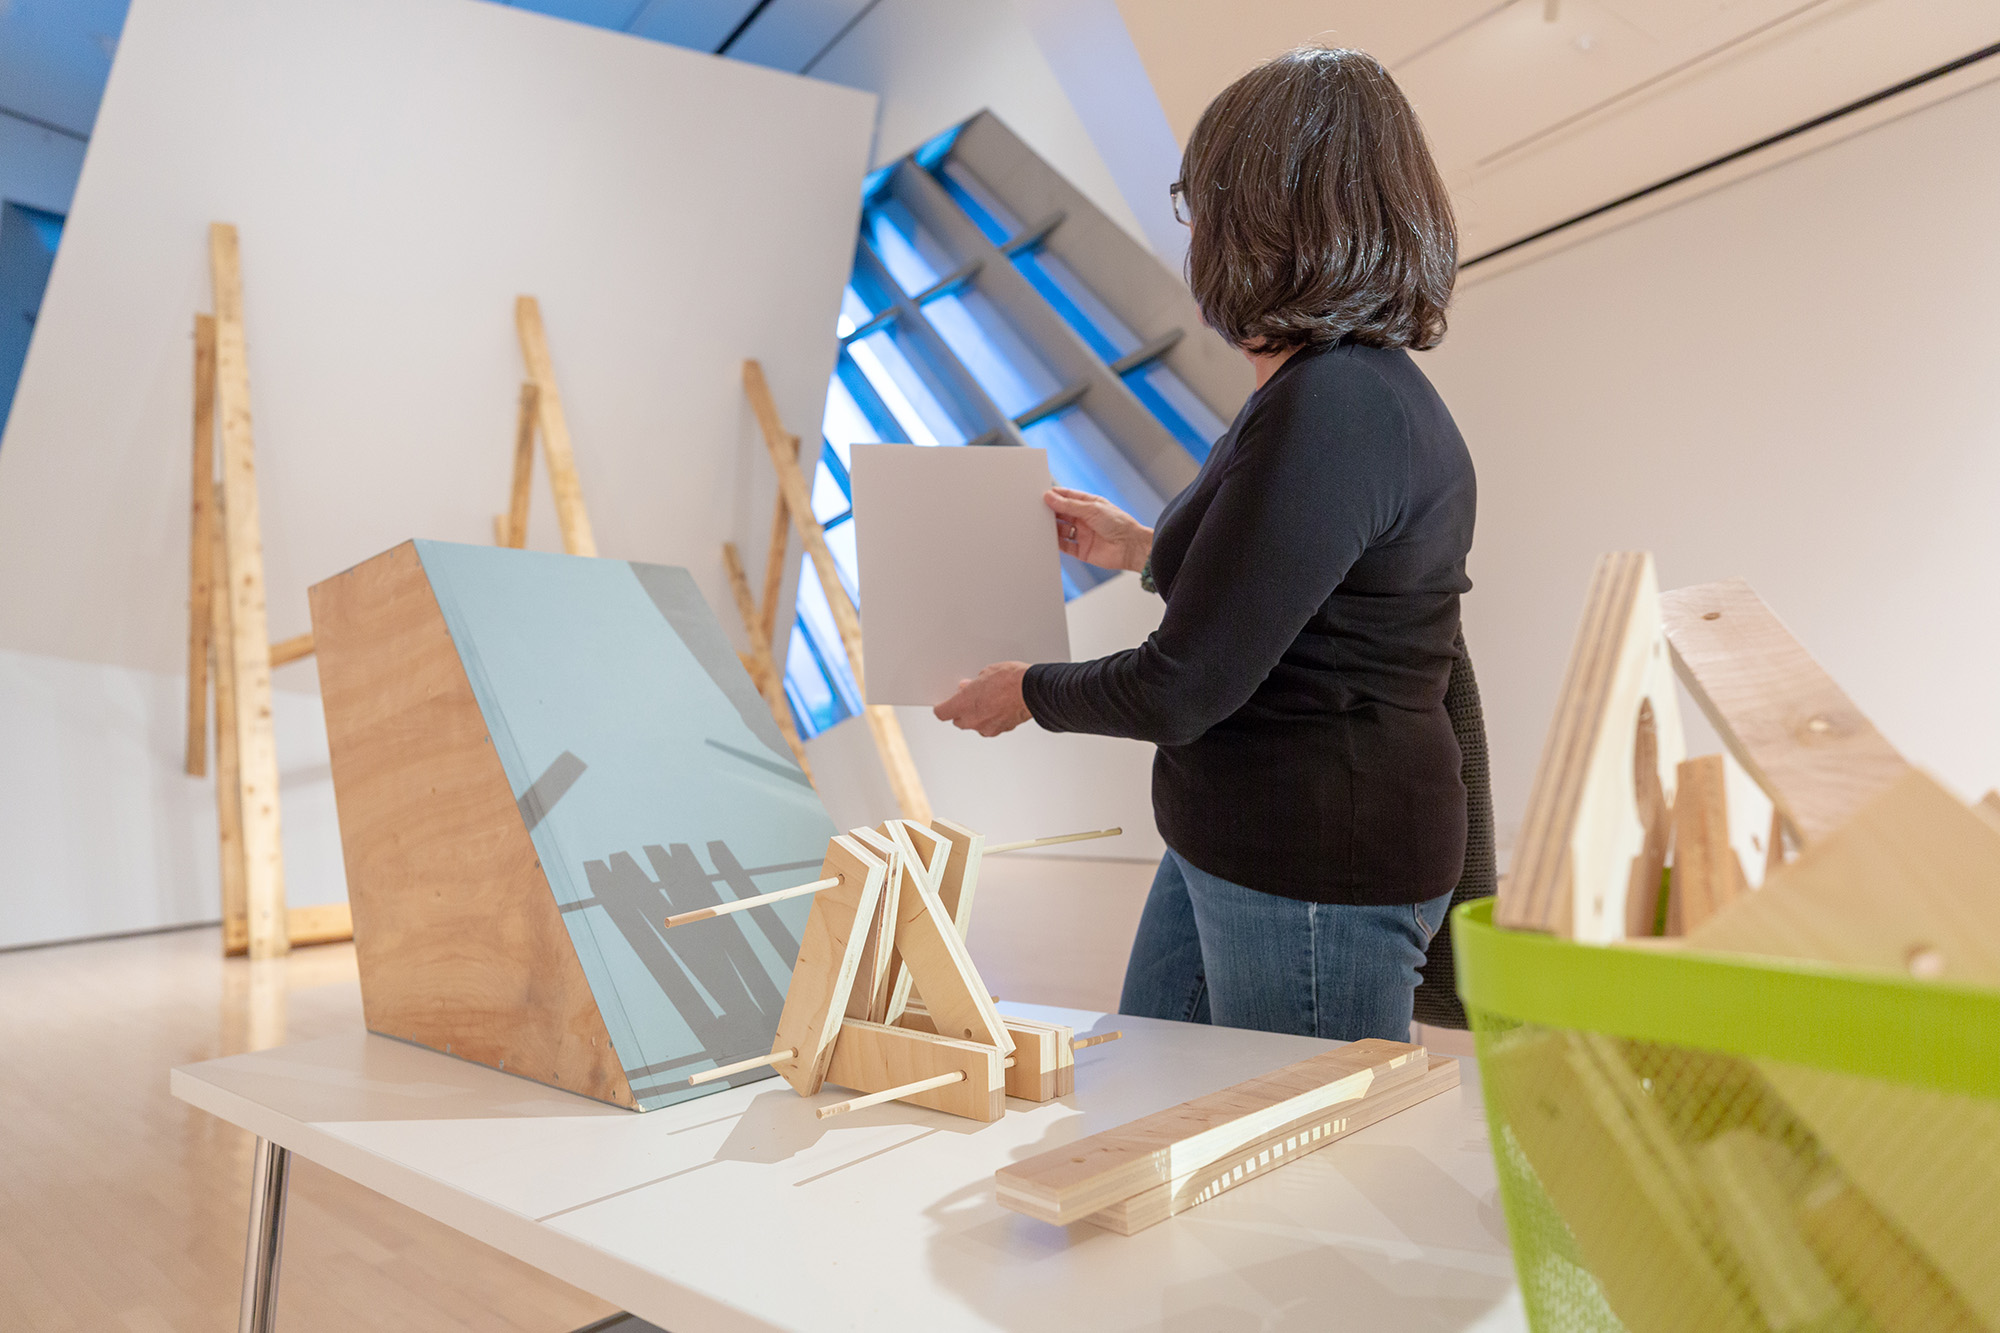 <i>Oscar Tuazon: Water School</i>, installation view at the Eli and Edythe Broad Art Museum at Michigan State University, 2019. Photo: Eat Pomegranate Photography